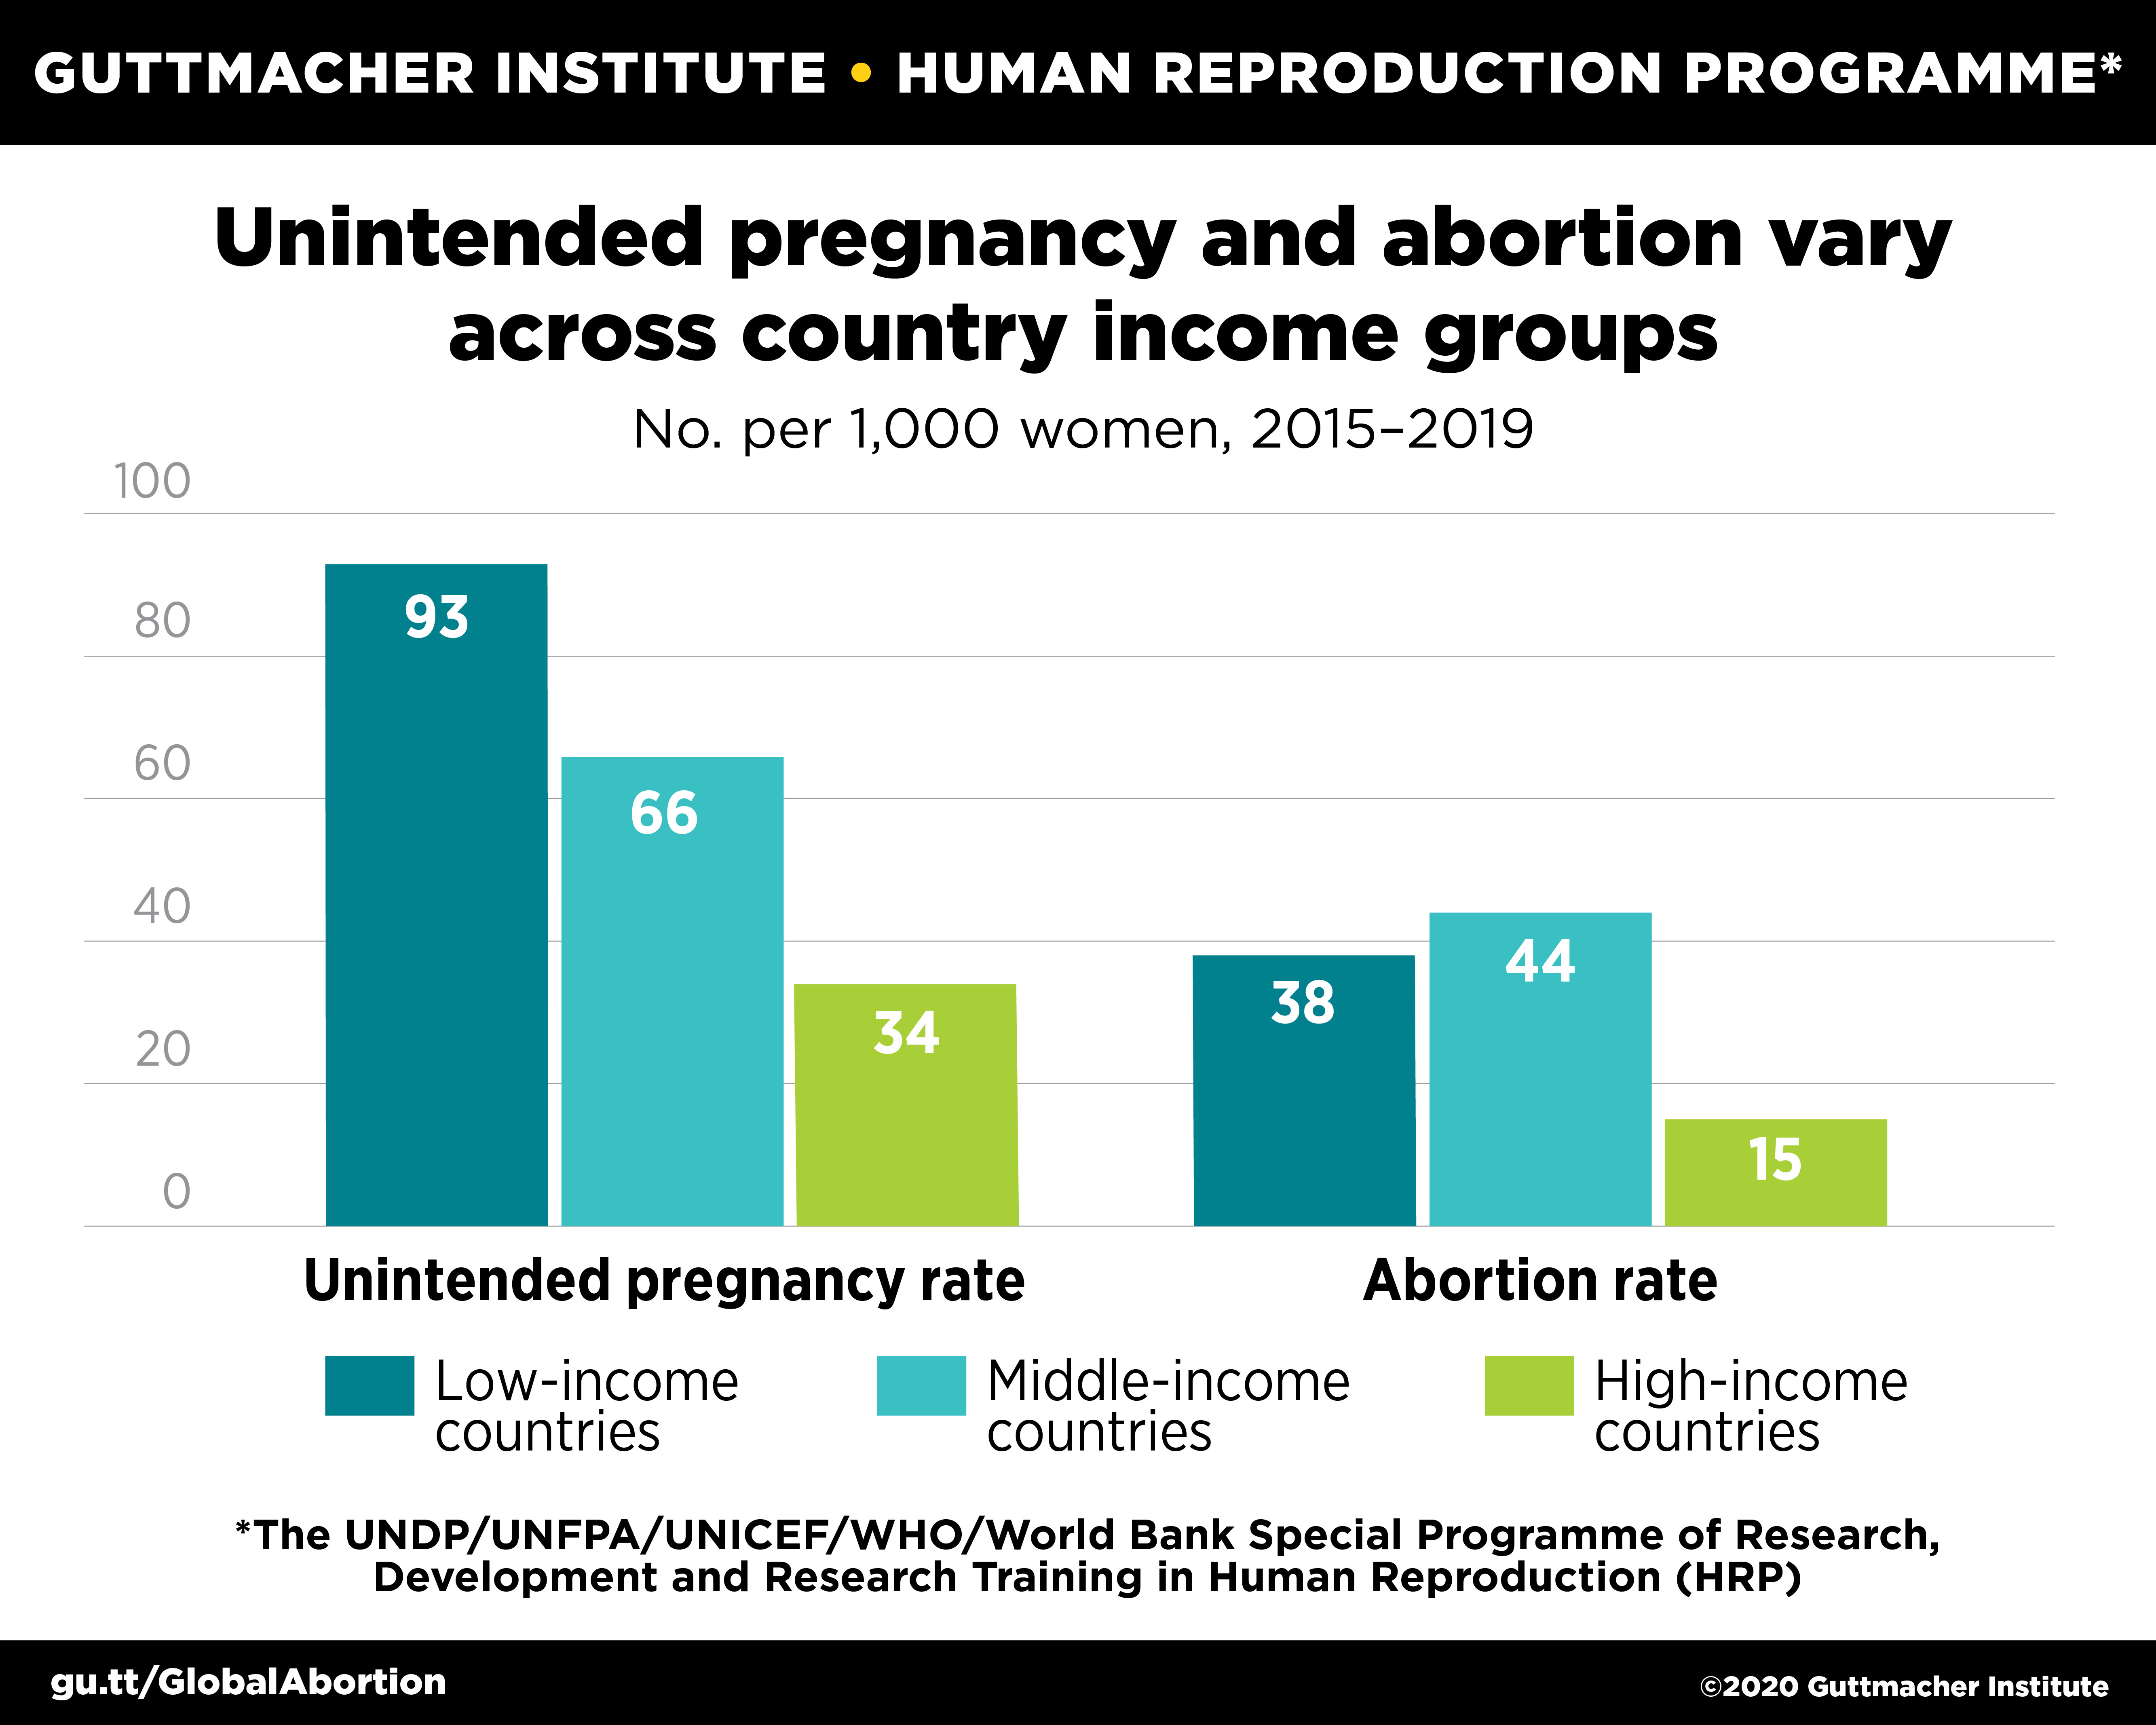 Unintended pregnancy and abortion vary across country income groups